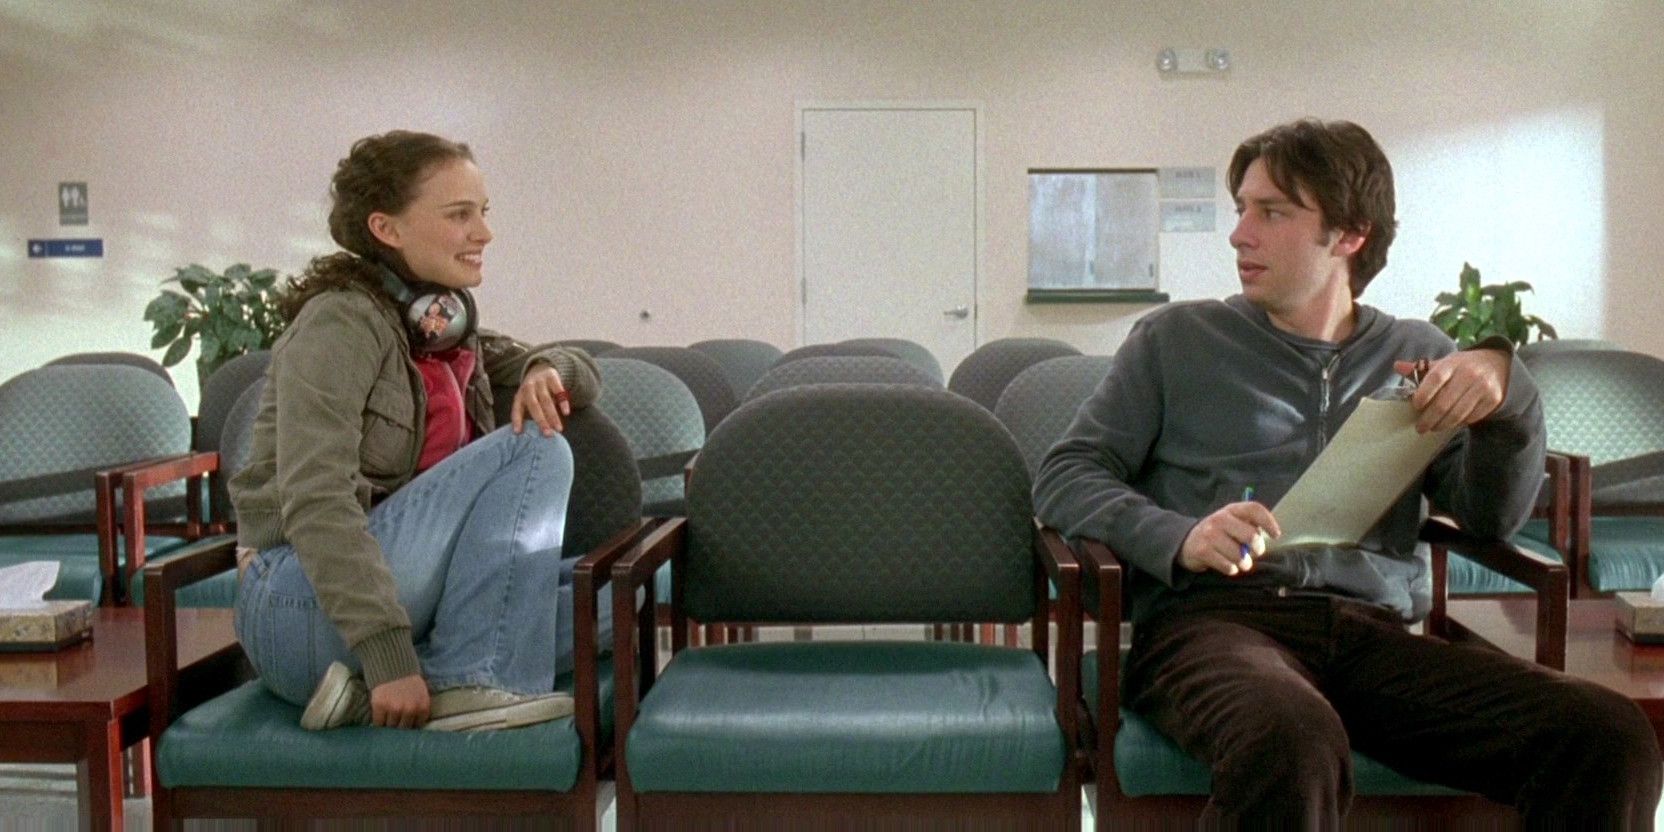 Natalie Portman and Zach Braff sitting on chairs and looking at each other in Garden State